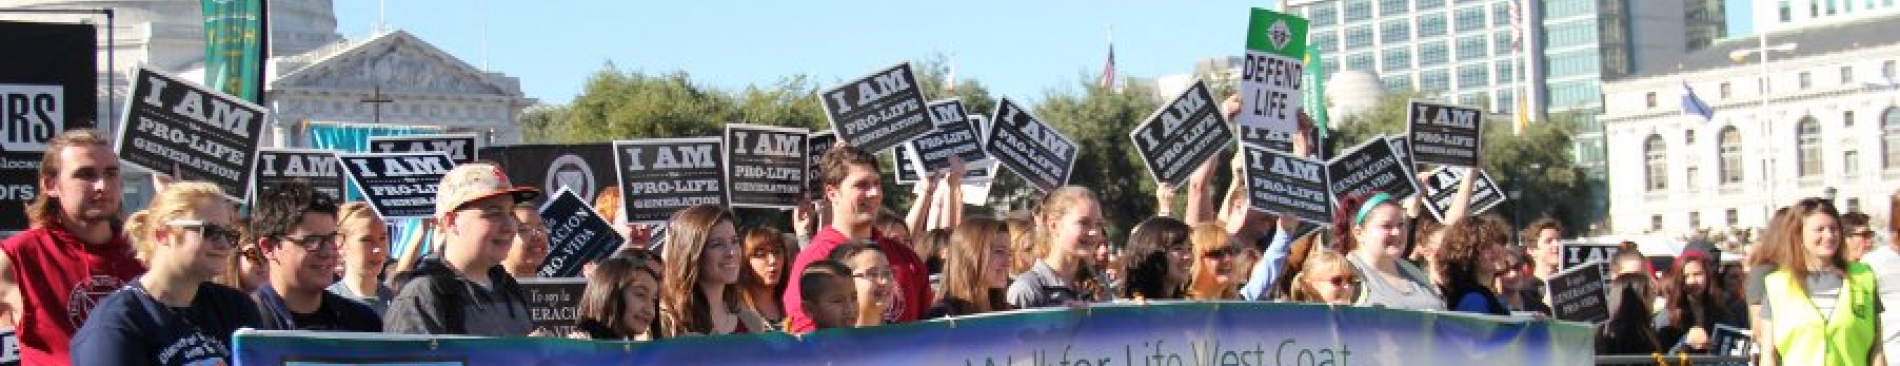 Slideshows: Students Lead the Way at Walk for Life 2015